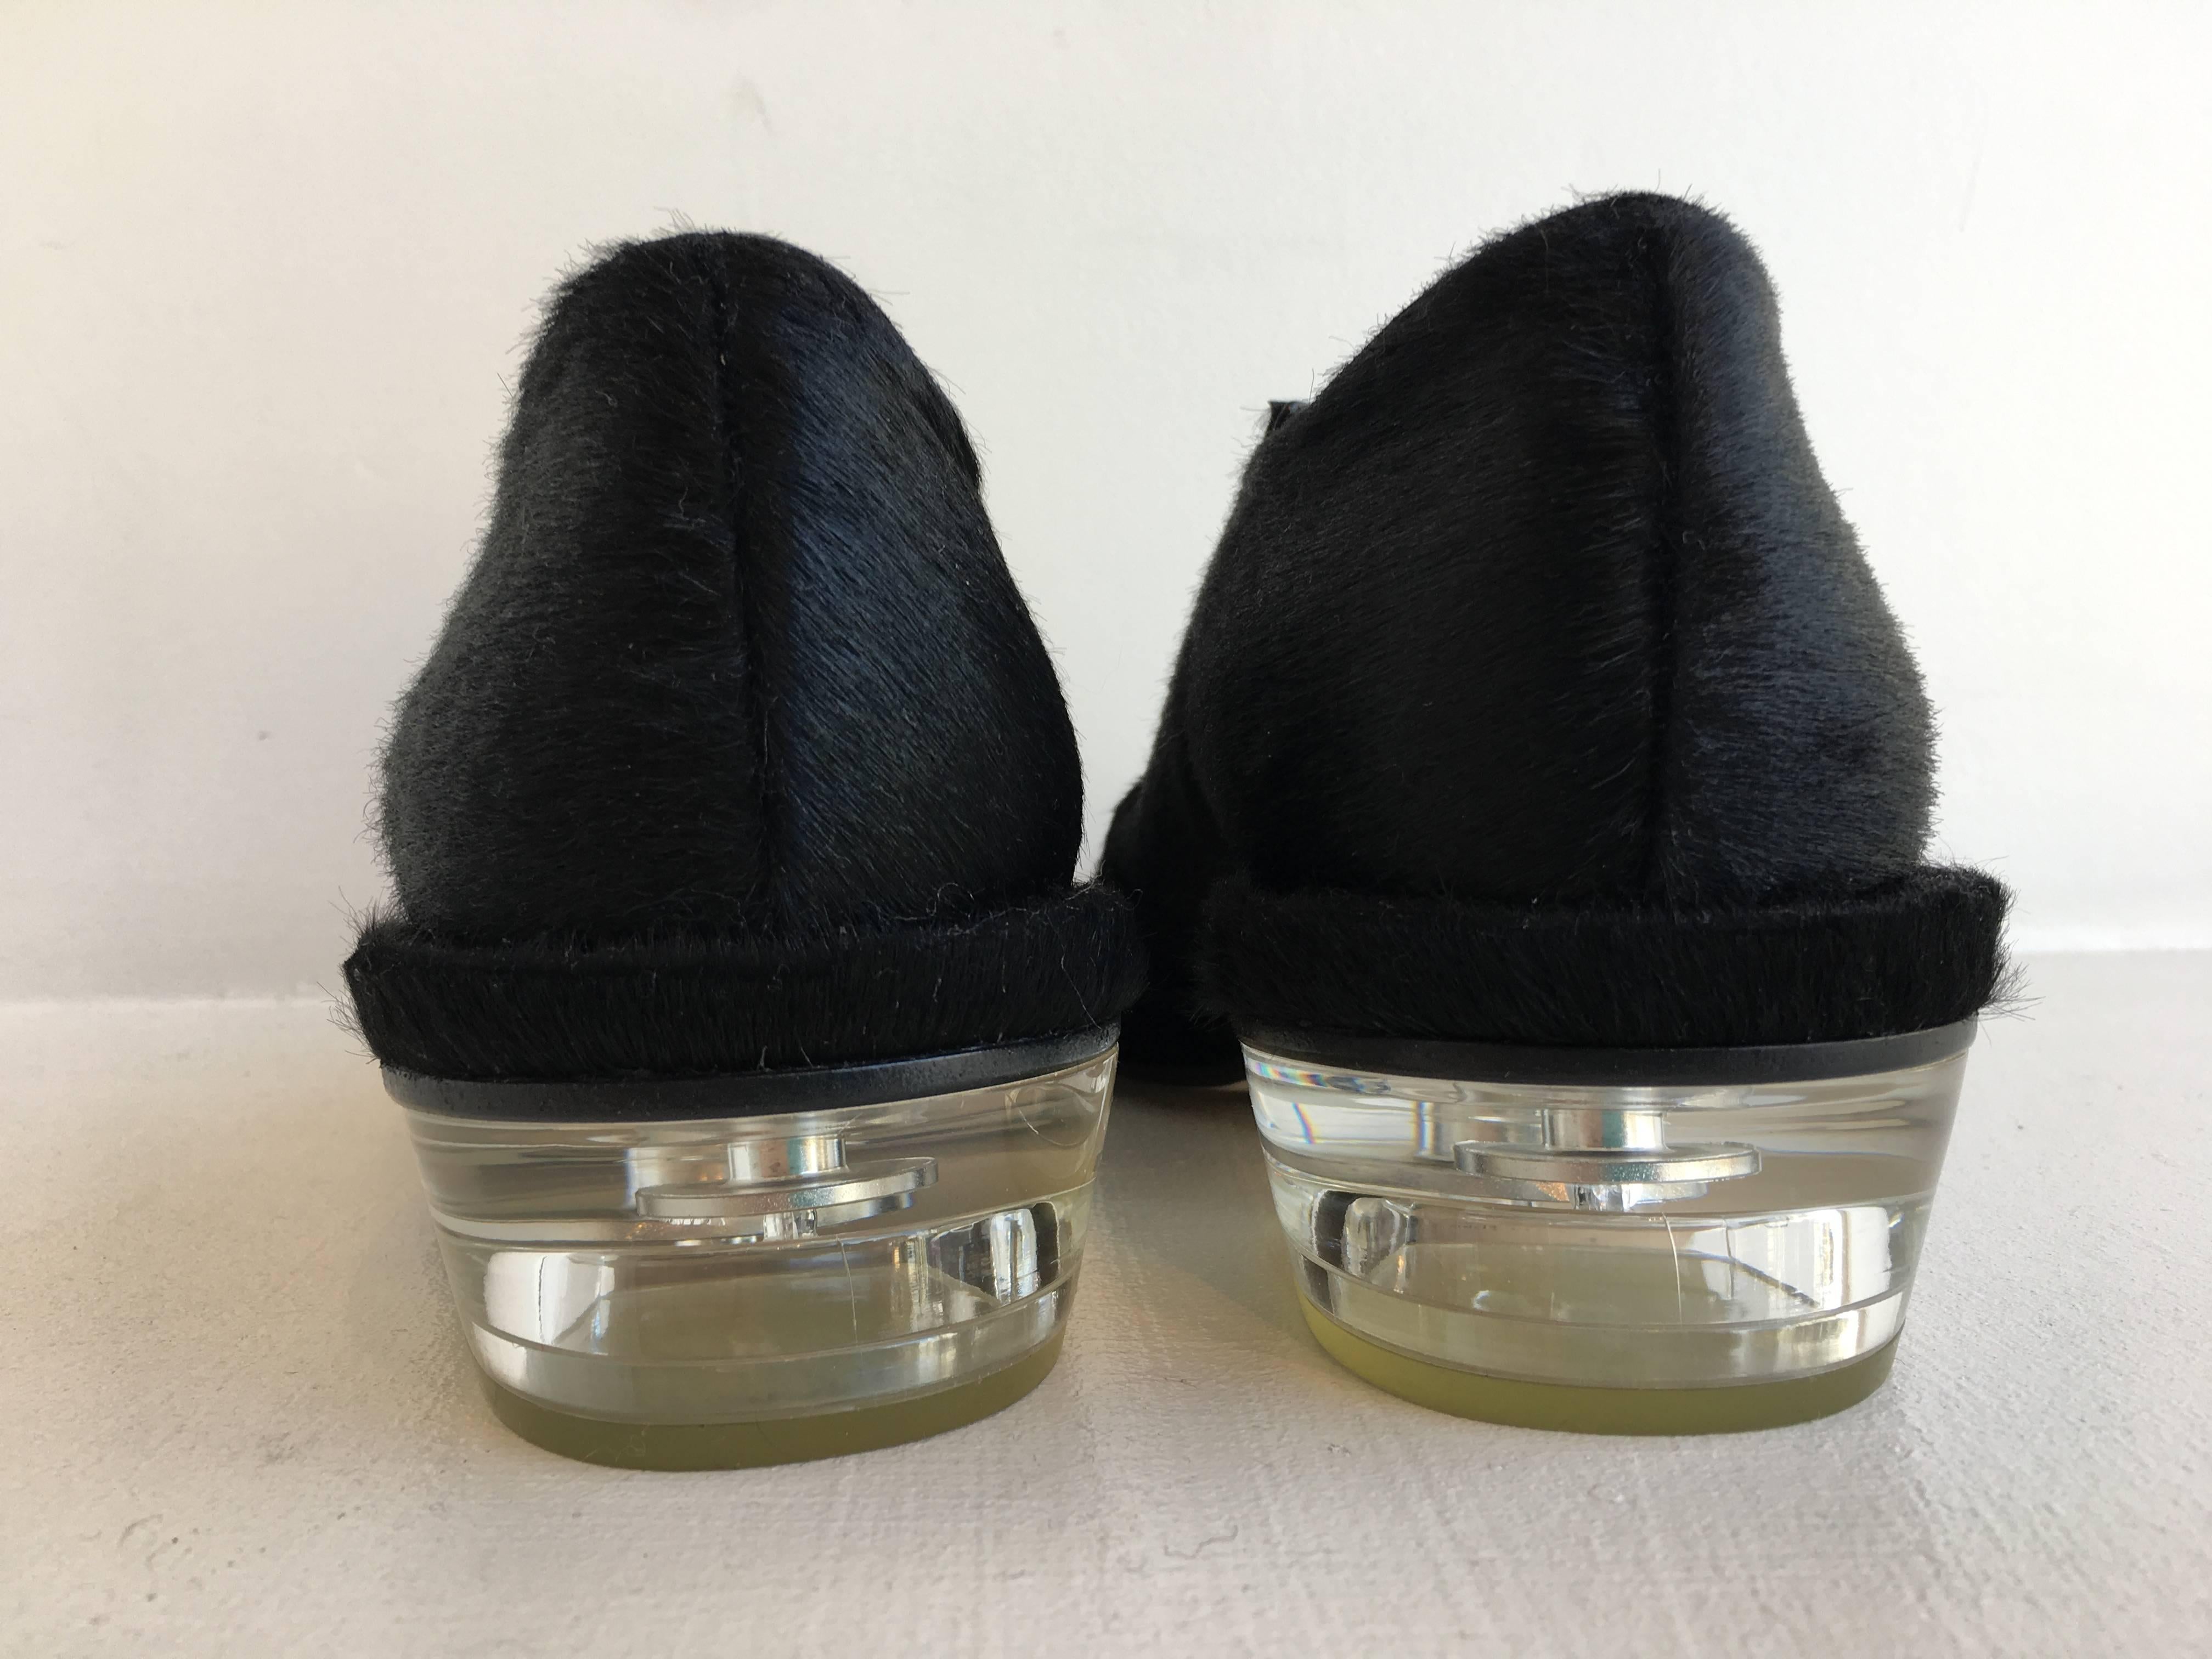 Simone Rocha Black Pony Hair Shoes (39) In New Condition For Sale In San Francisco, CA